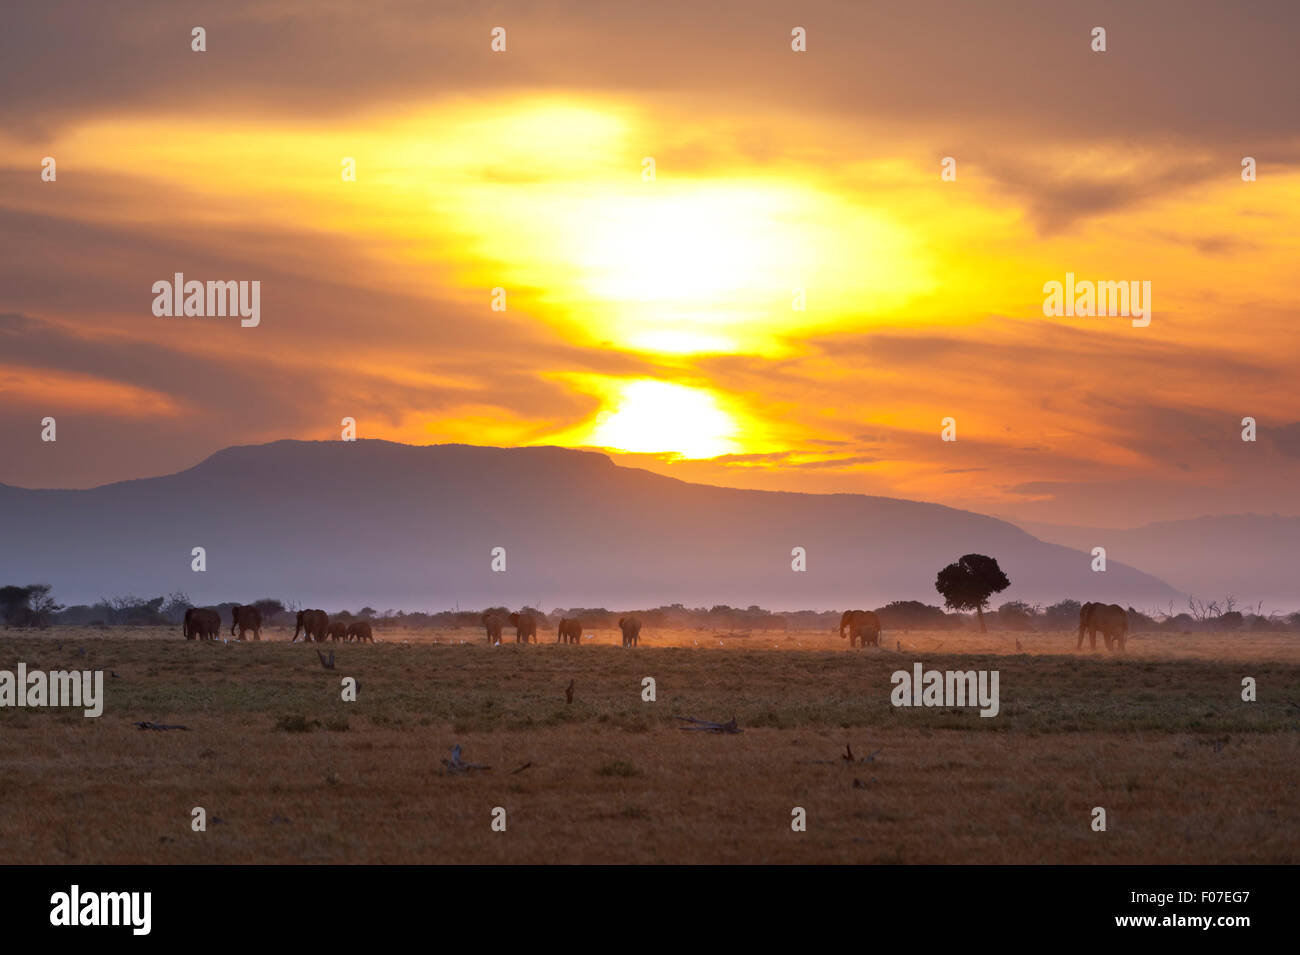 Sunset and landscape in Tsavo East National Park in Kenya with a group of elephants passing. Stock Photo